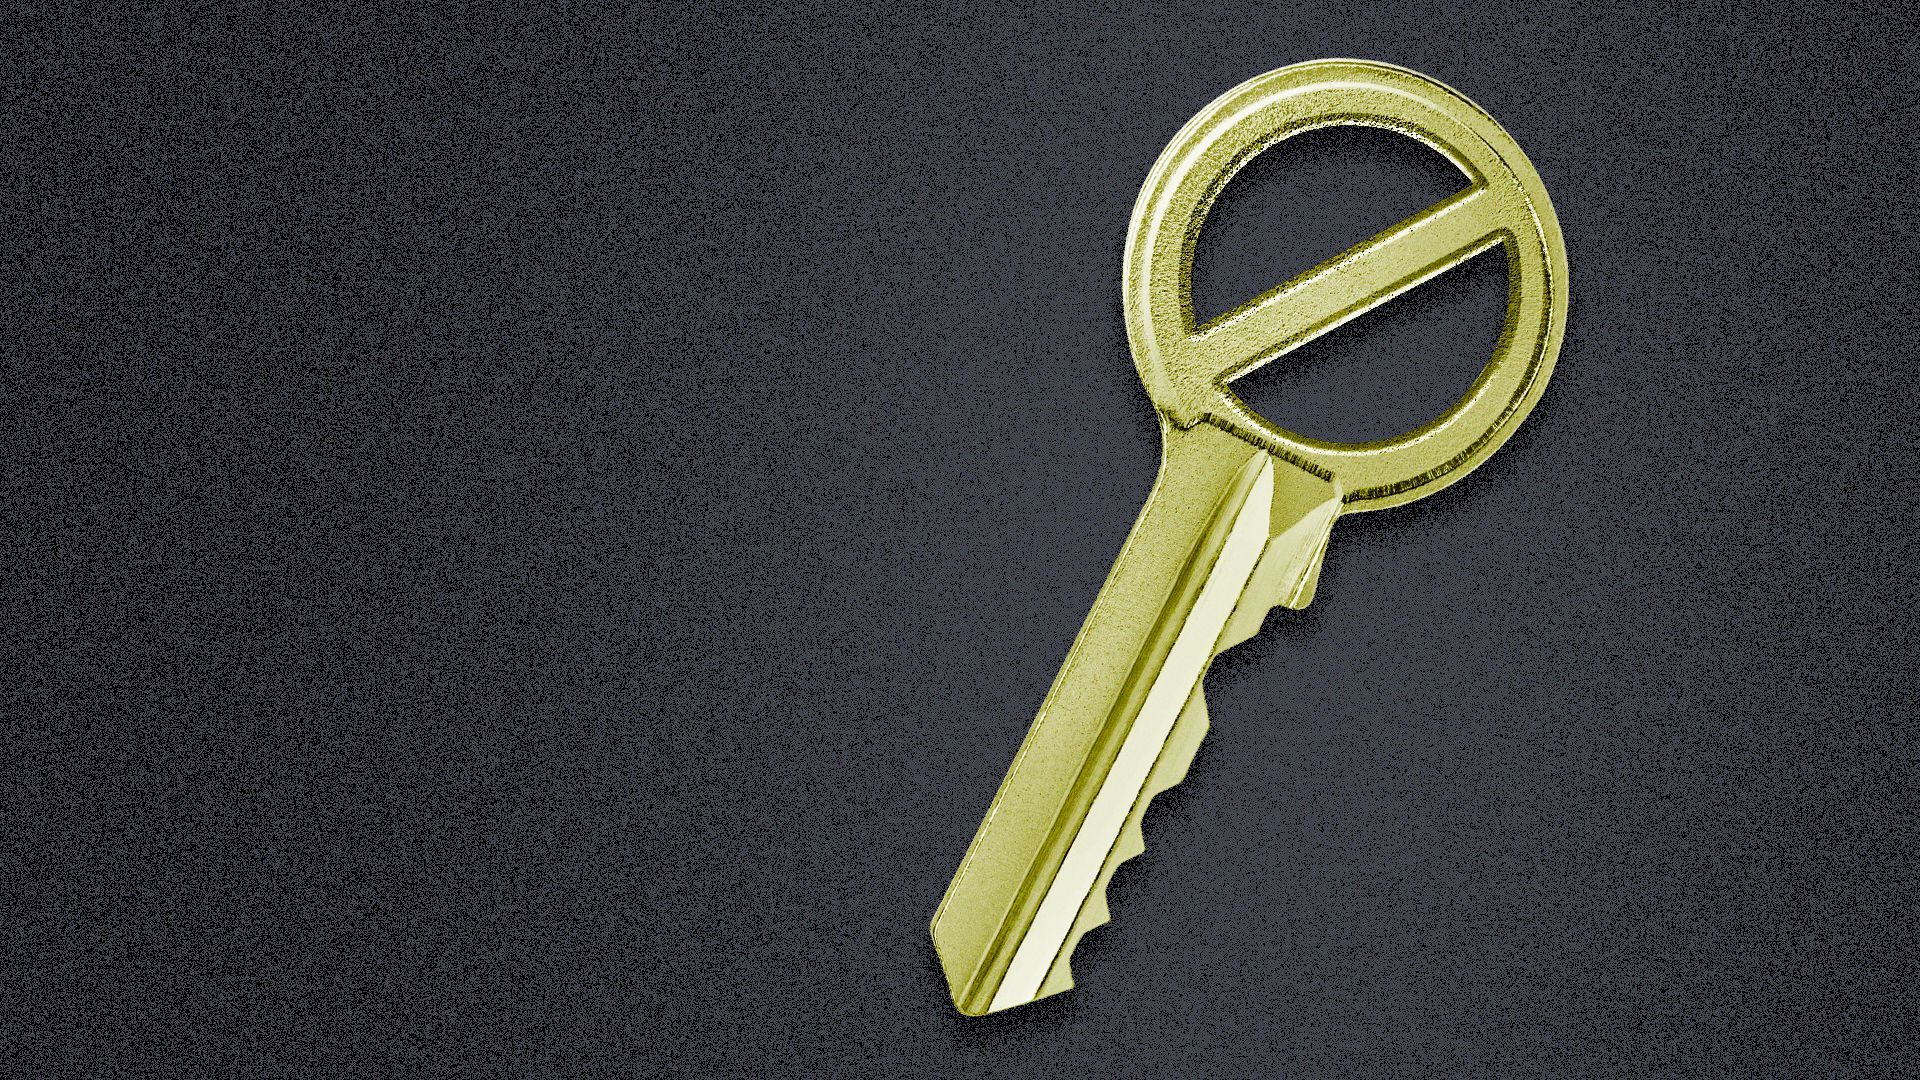 Illustration of a gold key with the "no" symbol replacing the top of the key. 